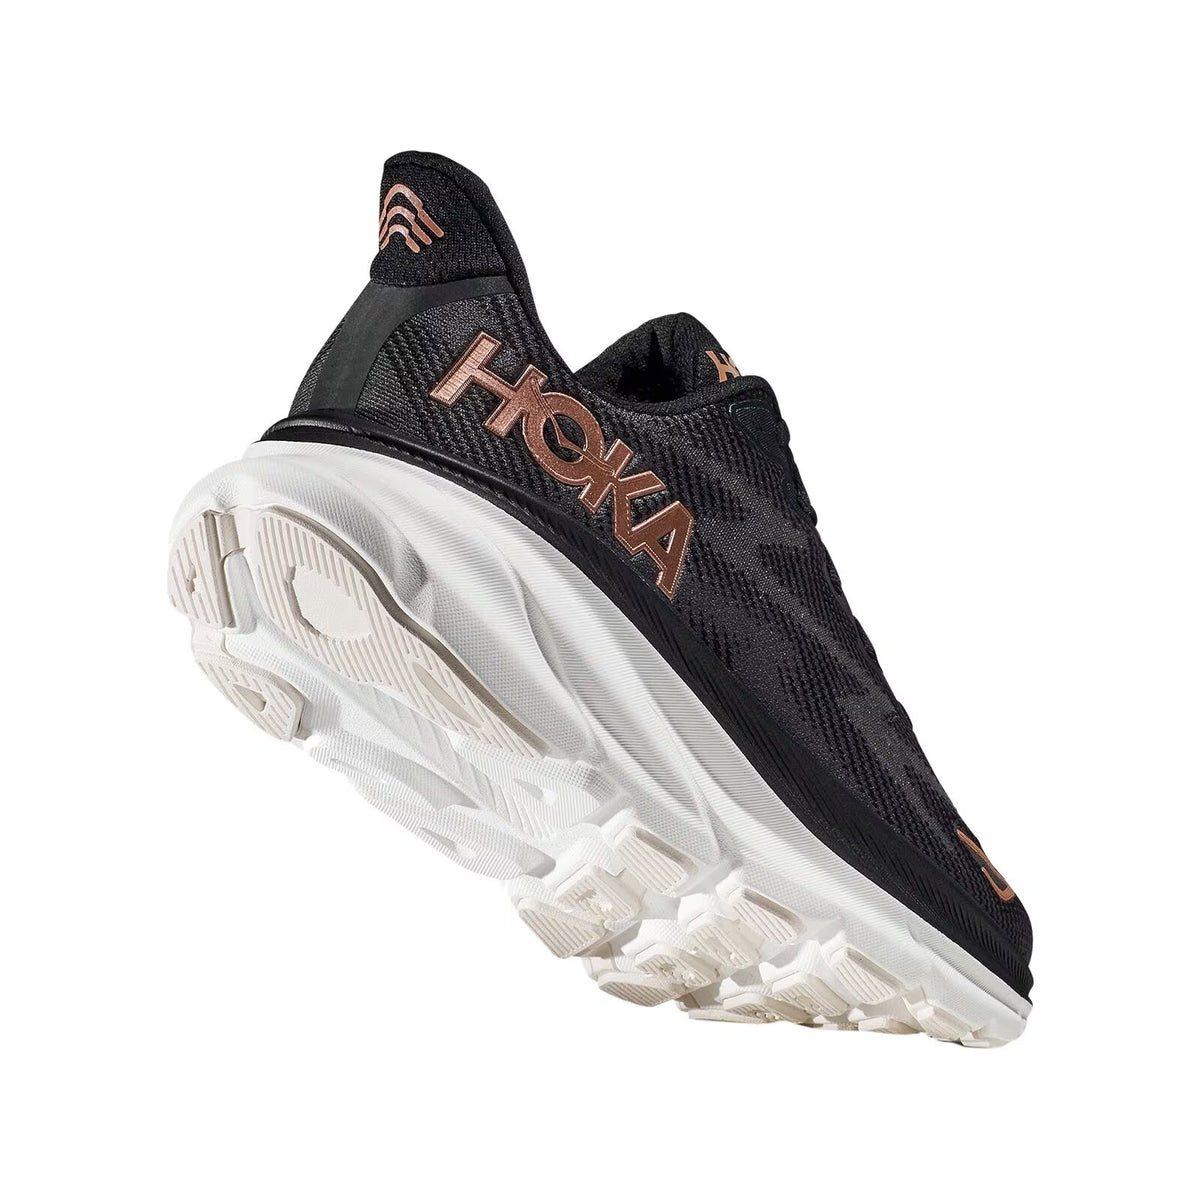 Black and white Hoka Clifton 9 running shoe with brand logo on the side and thick cushioned sole, displayed against a white background.